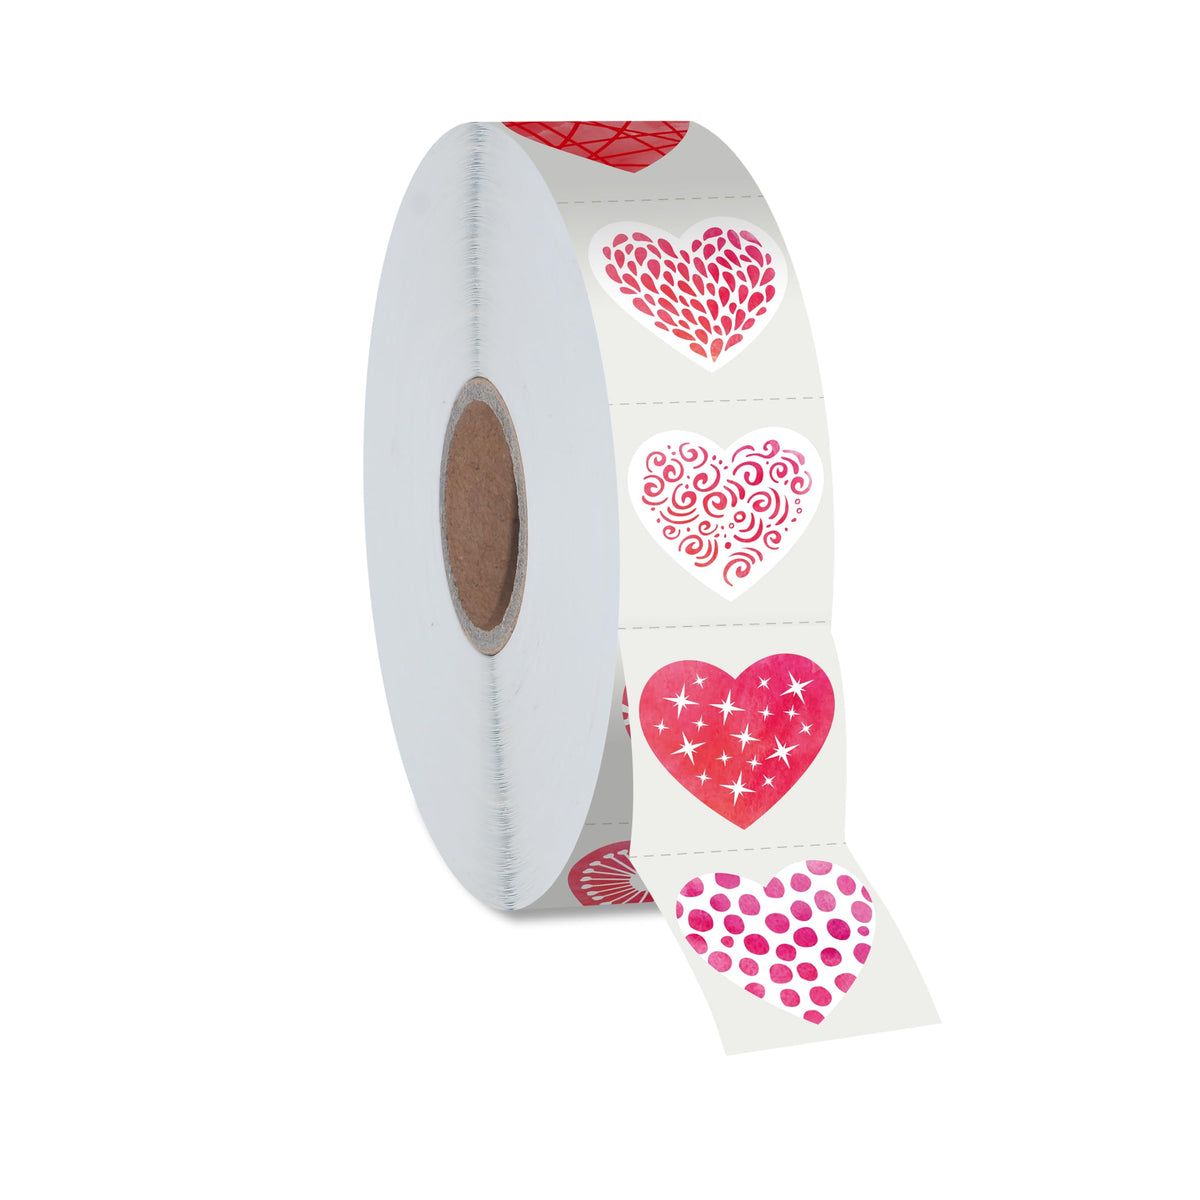 1200 PCS Heart-Shaped Sticker, 12 Designs Self-Adhesive Labels with Perforation Line in Roll, Use for Valentine's Day, Blood Drives, Teachers & Classrooms, Award Charts, Bookmarks (3/4 inches Each)